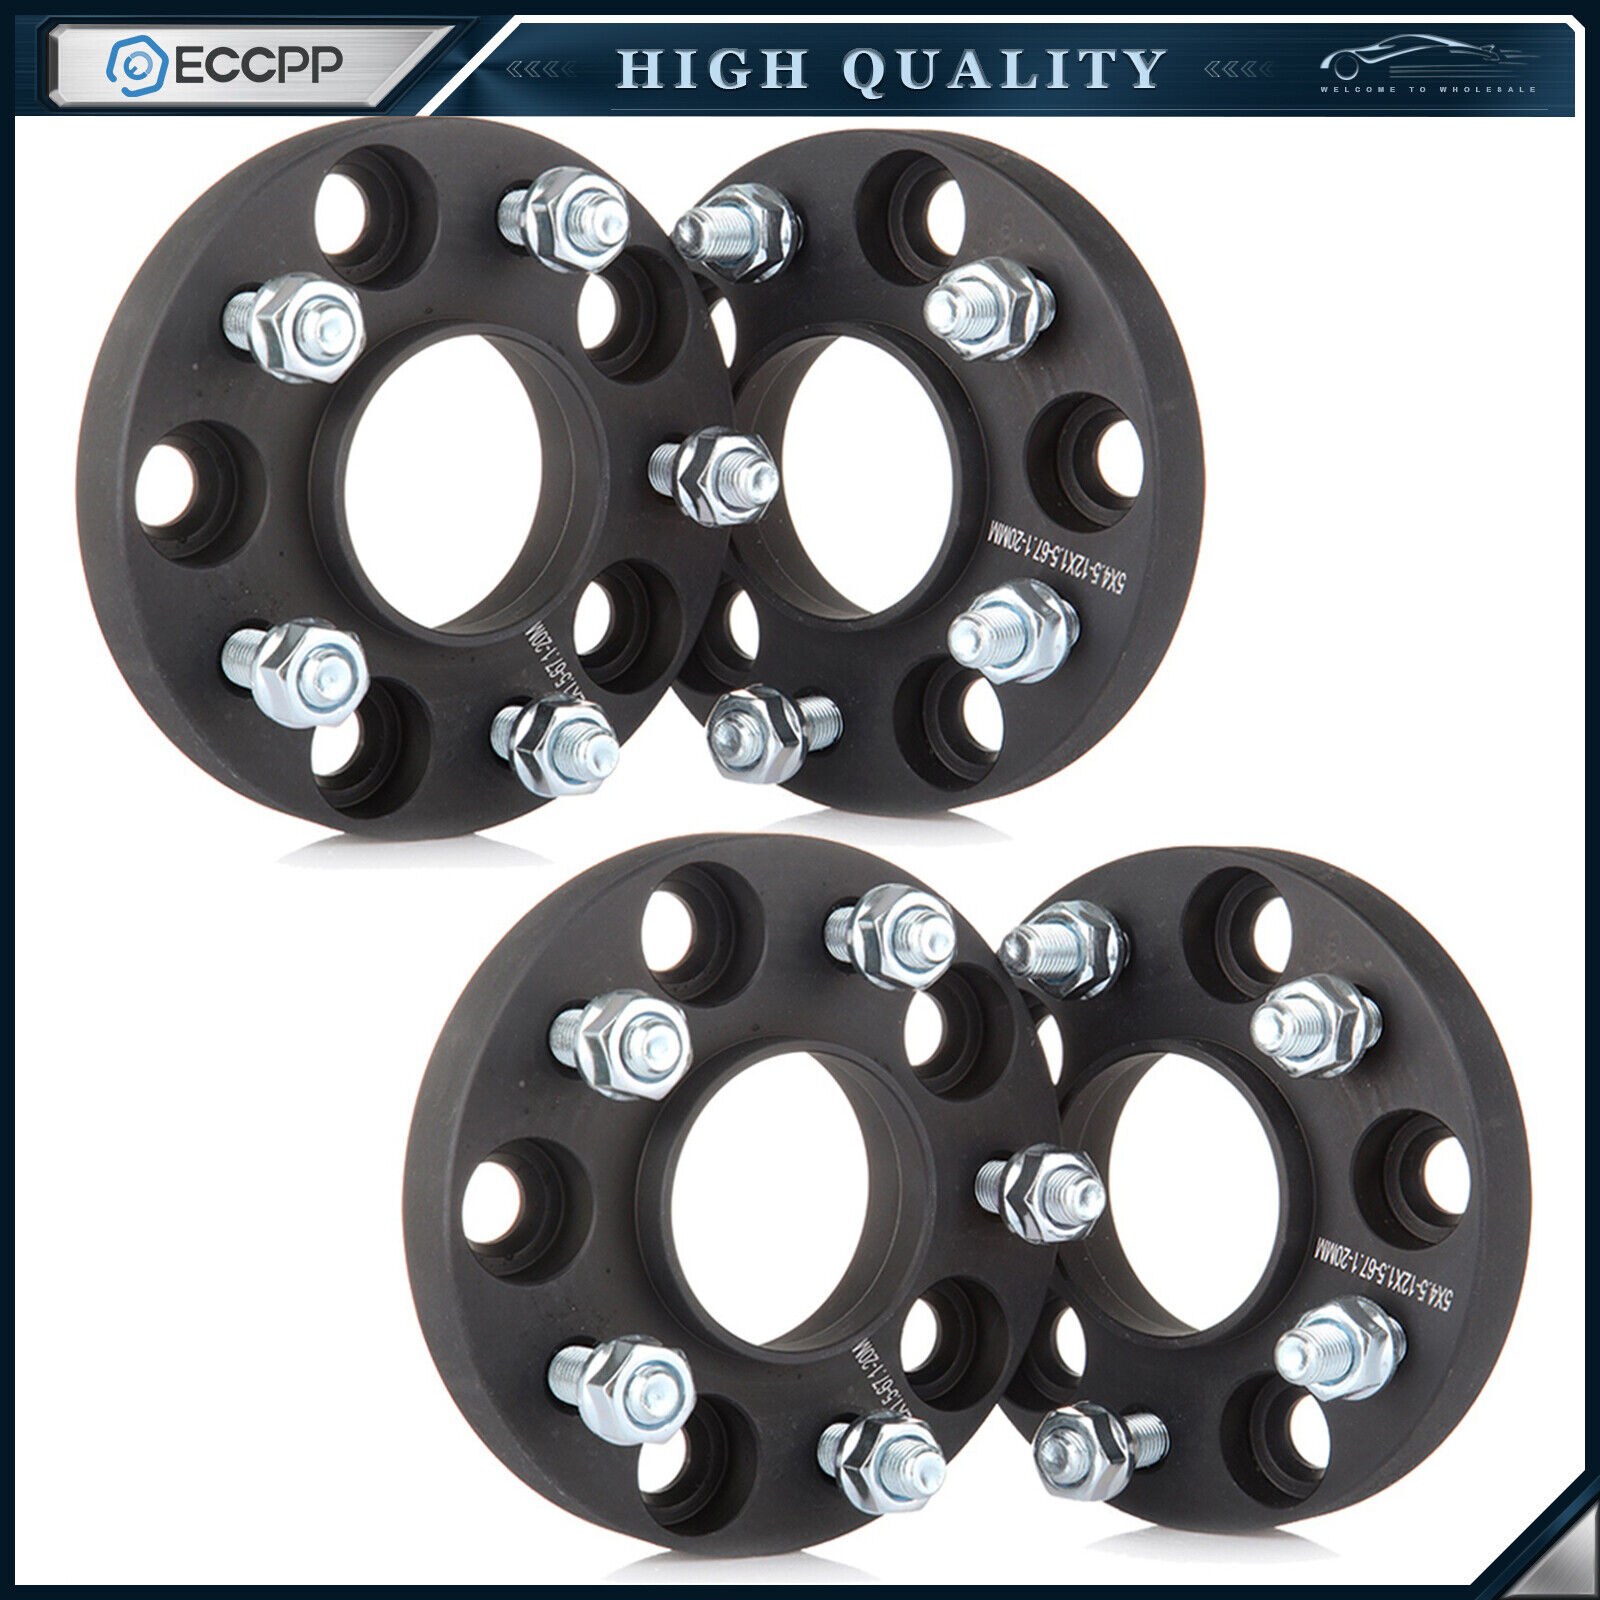 Set of 4 Wheel Spacers 5x4.5 20mm For Hyundai Elantra Genesis Coupe Veloster